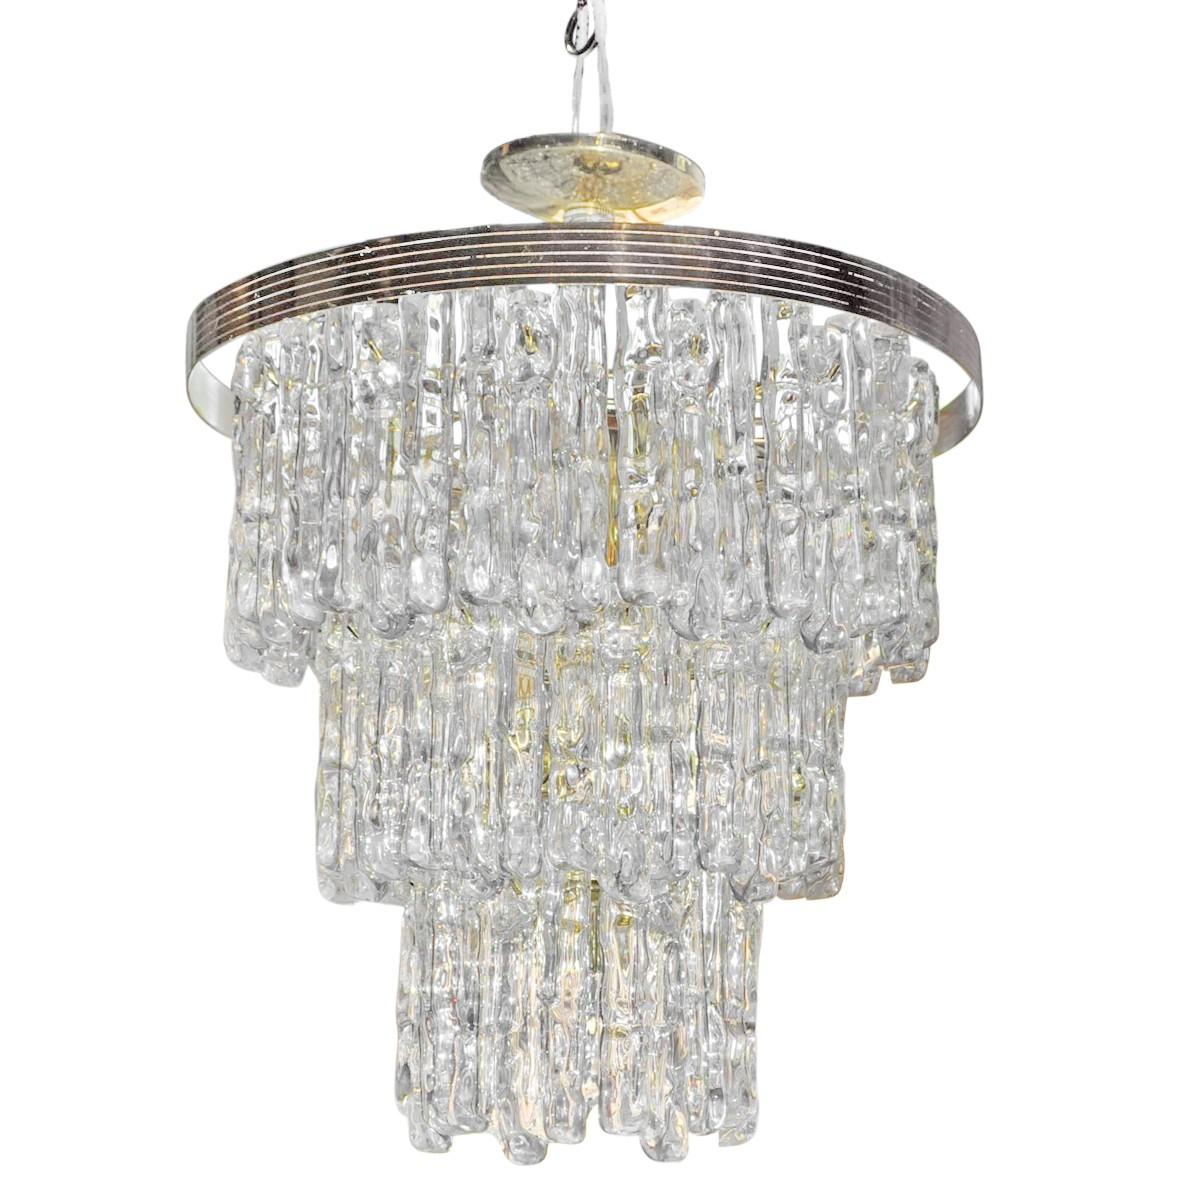 Italian Hollywood Regency style modern three-tiered waterfall chandelier with gold brass frame and ice-like Lucite/acrylic prisms. Original wiring in working condition. Eight candle base bulbs. 40 watts each. Brass-plated canopy included. 

In the